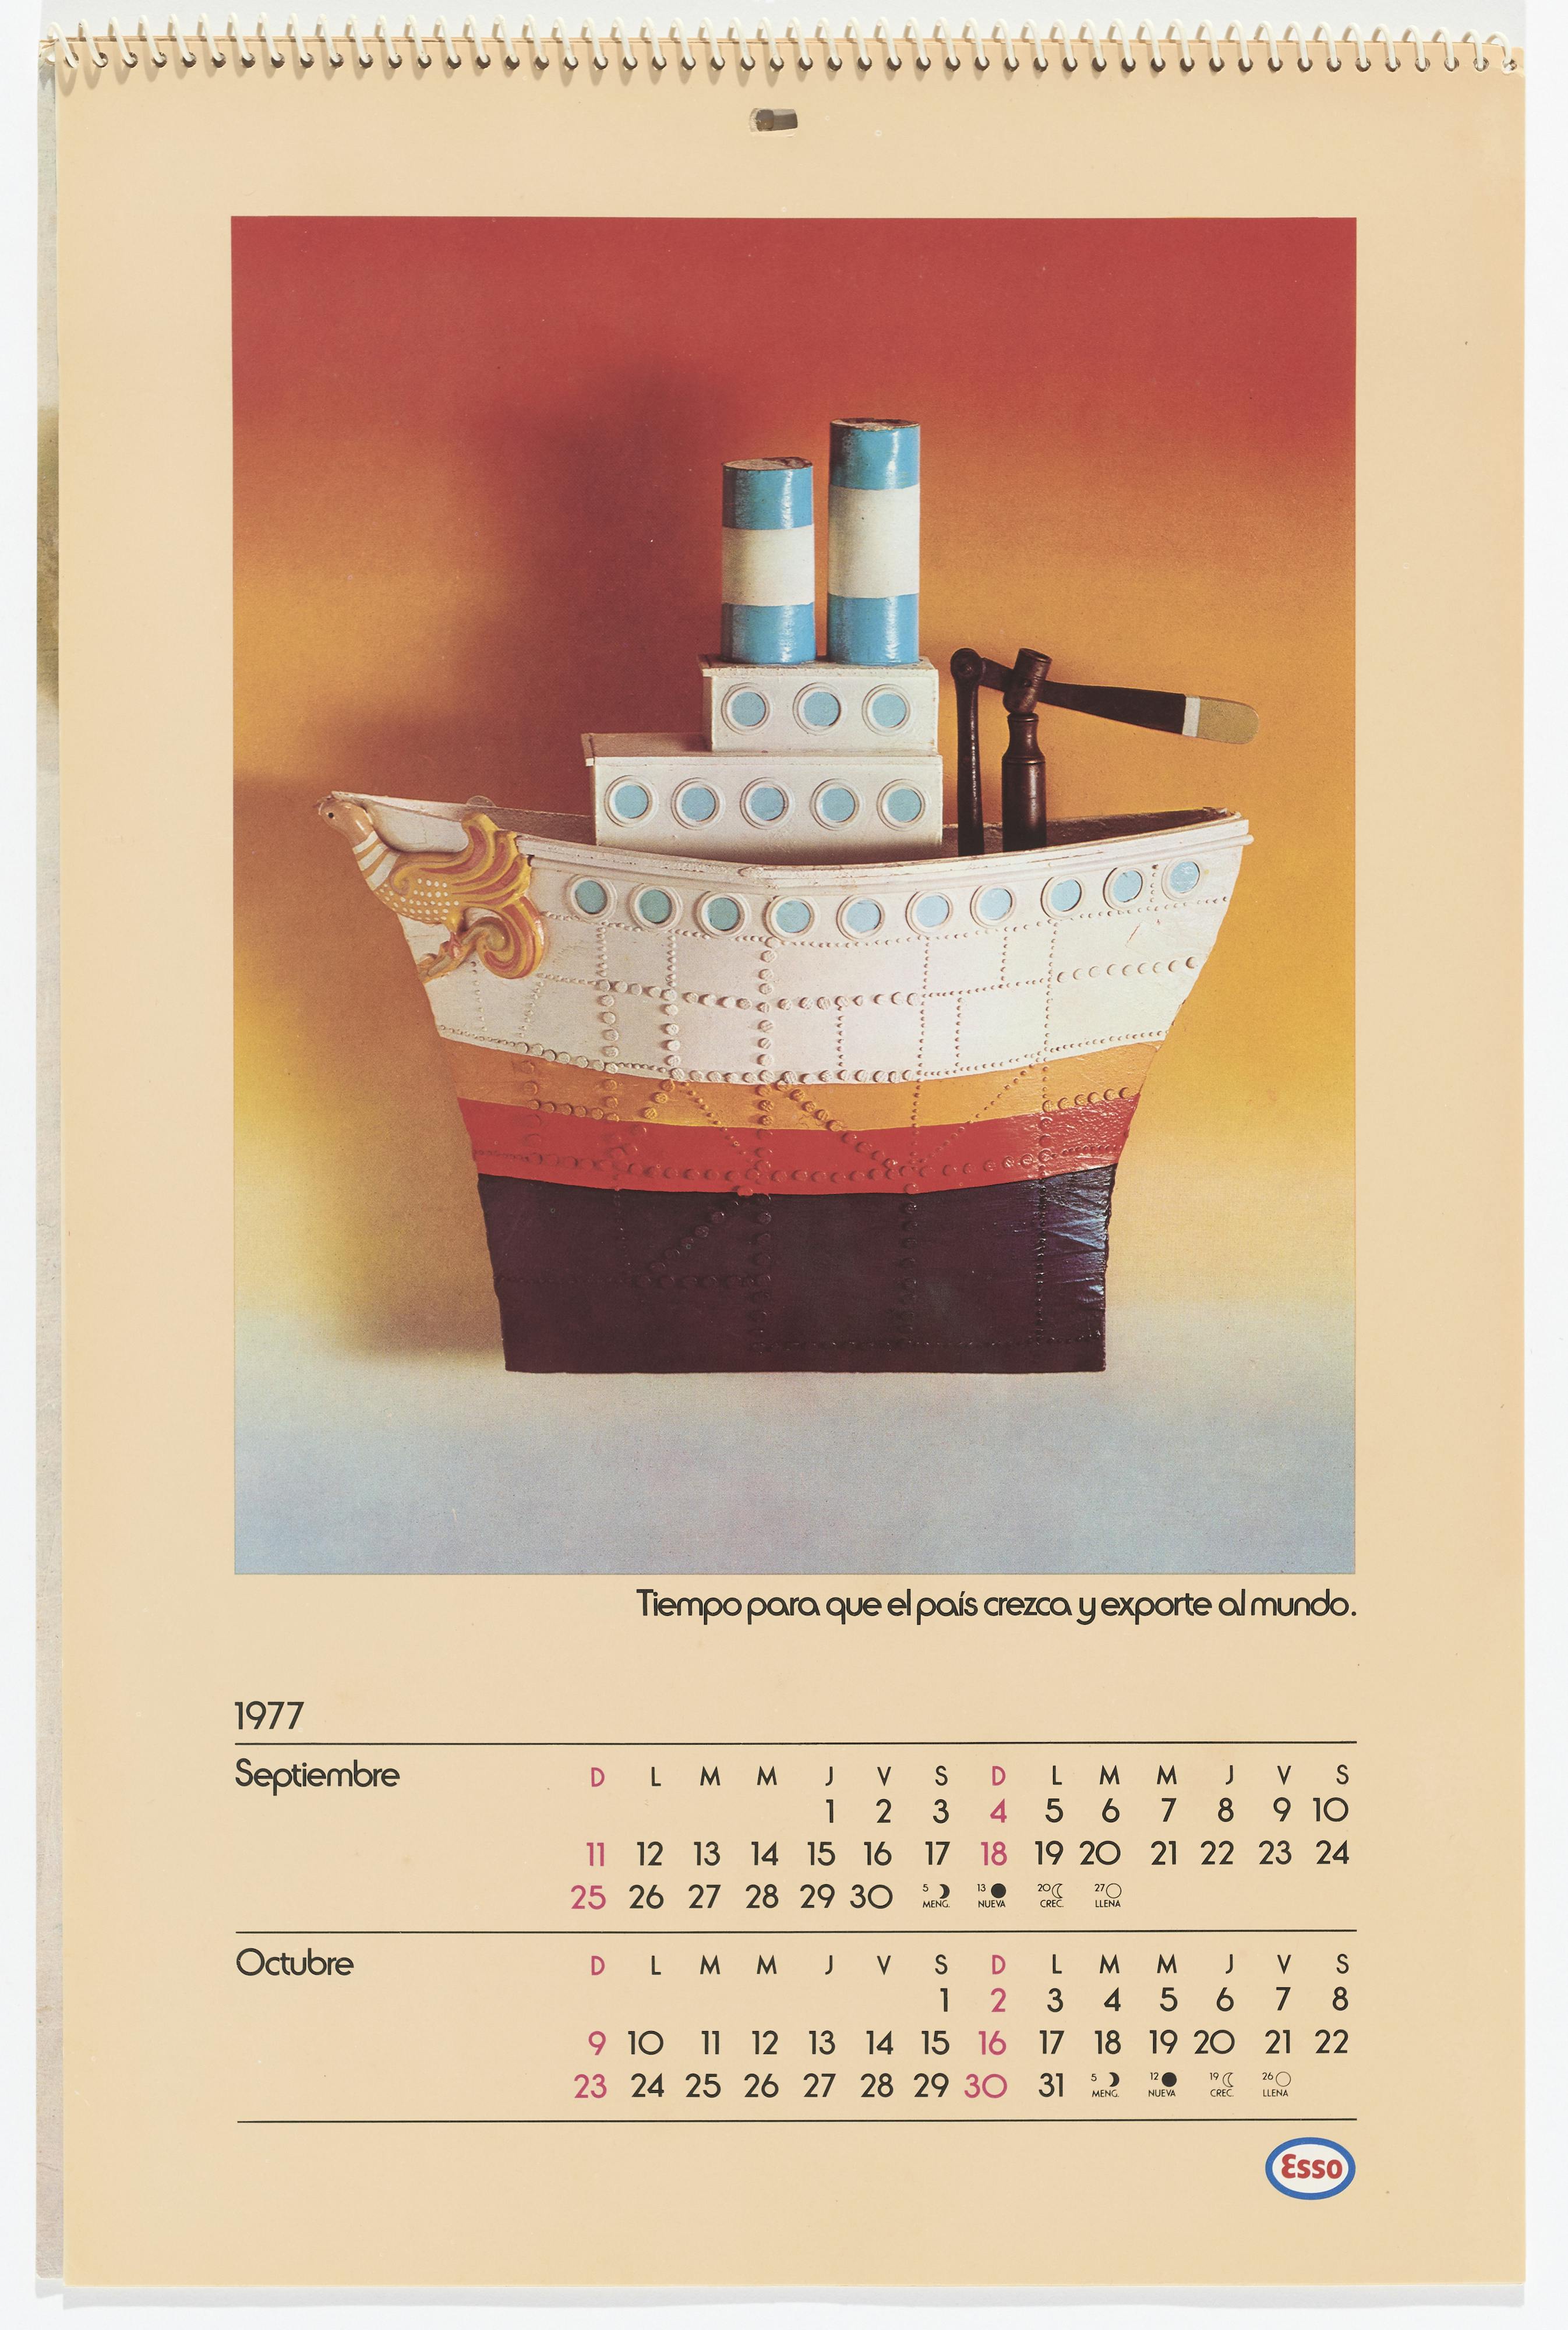 A bright-orange page of a spiral-bound calendar, which holds in its upper section a picture of a toy boat against an abstracted orange-and-blue background. The boat is a steamliner, with blue-and-white striped smokestacks, bright blue portholes, and a figurehead of a bright orange bird. Below the picture, on the right, a caption reads: “Tiempo para que el país crezca y exporte al mundo.” In the lower quarter of the sheet, the calendar days are arranged in biweekly rows for September and October 1977. In the lower right corner of the calendar sheet is the Esso company logo: a white oval outlined in blue with the word "Esso" printed in red within it.